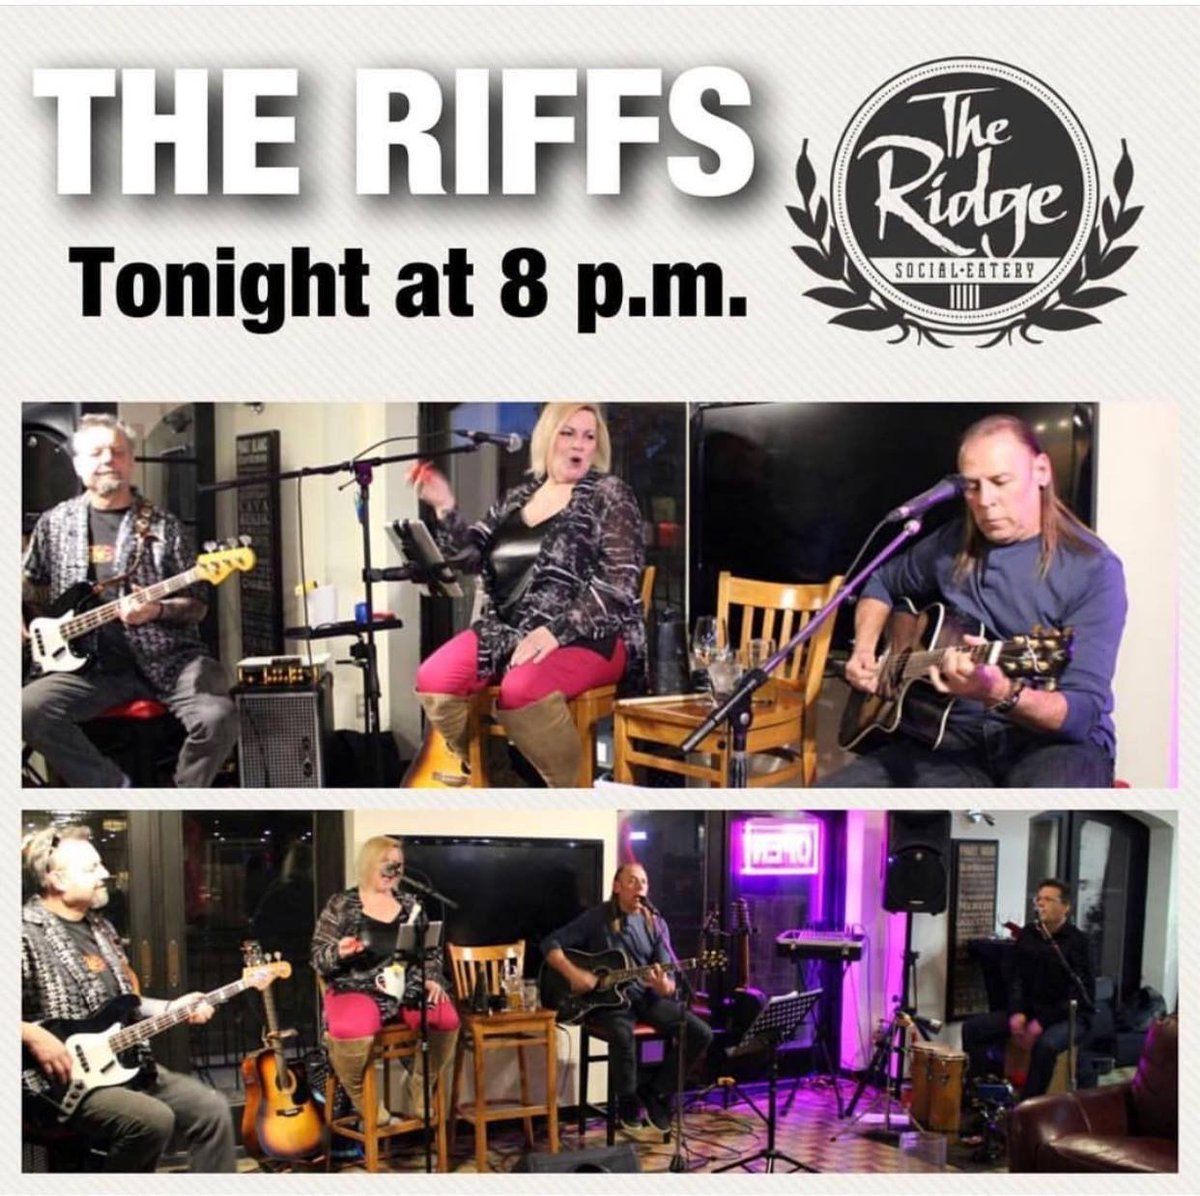 We always have the best time when The Riffs are here! And you will to! - join us, won’t you?

#theridge #theridgesocial #theriffs #kwmusic #acoustic #kwawesome #cbridgemusic #wrmusic #fridayfun #fridaynight #joinus #amazingmusic #food #livemusic #jam #instamusic